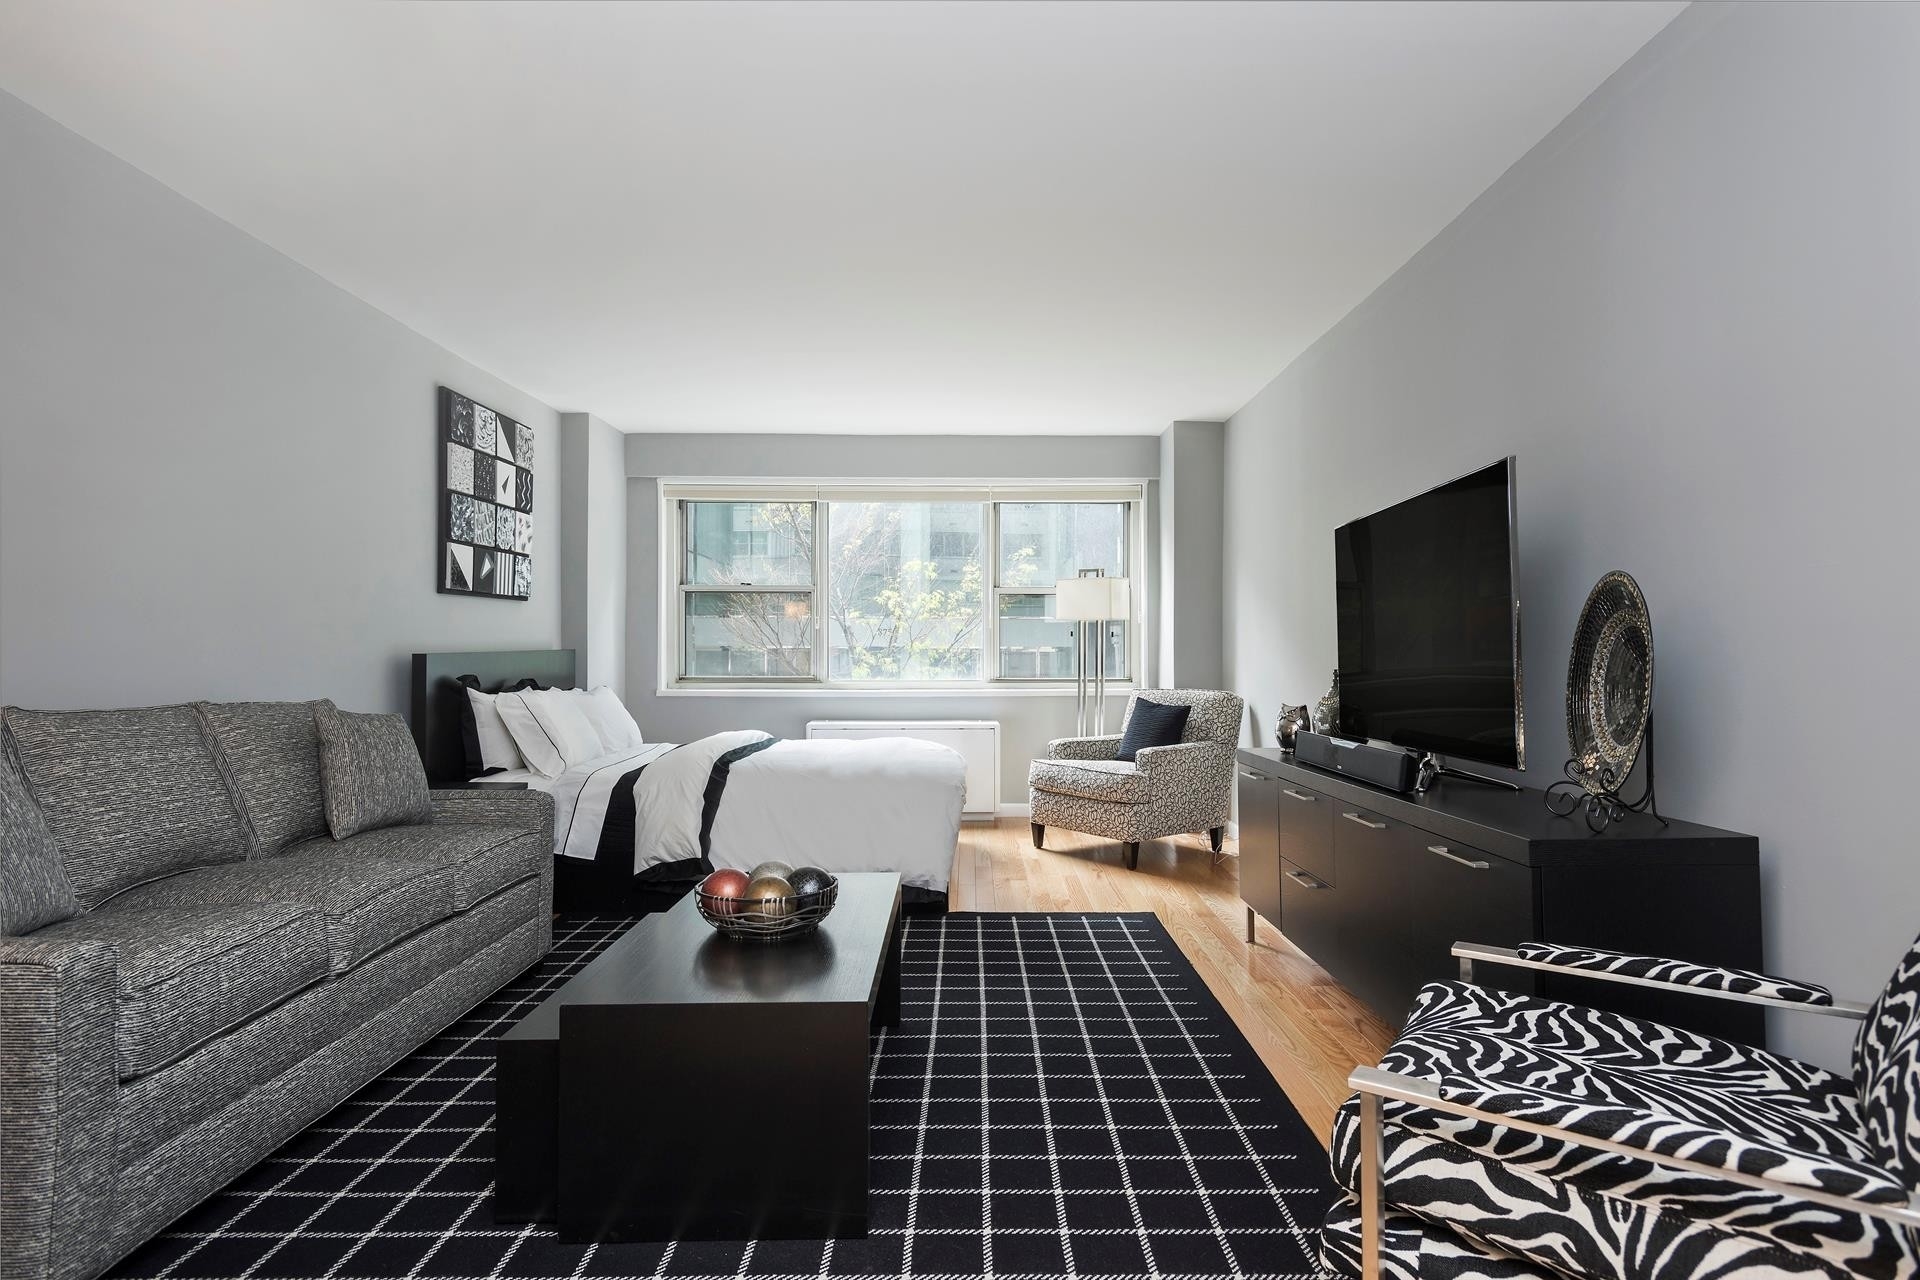 Co-op / Condo for Sale at The Hawthorne, 211 E 53RD ST , 2H Midtown East, New York, NY 10022